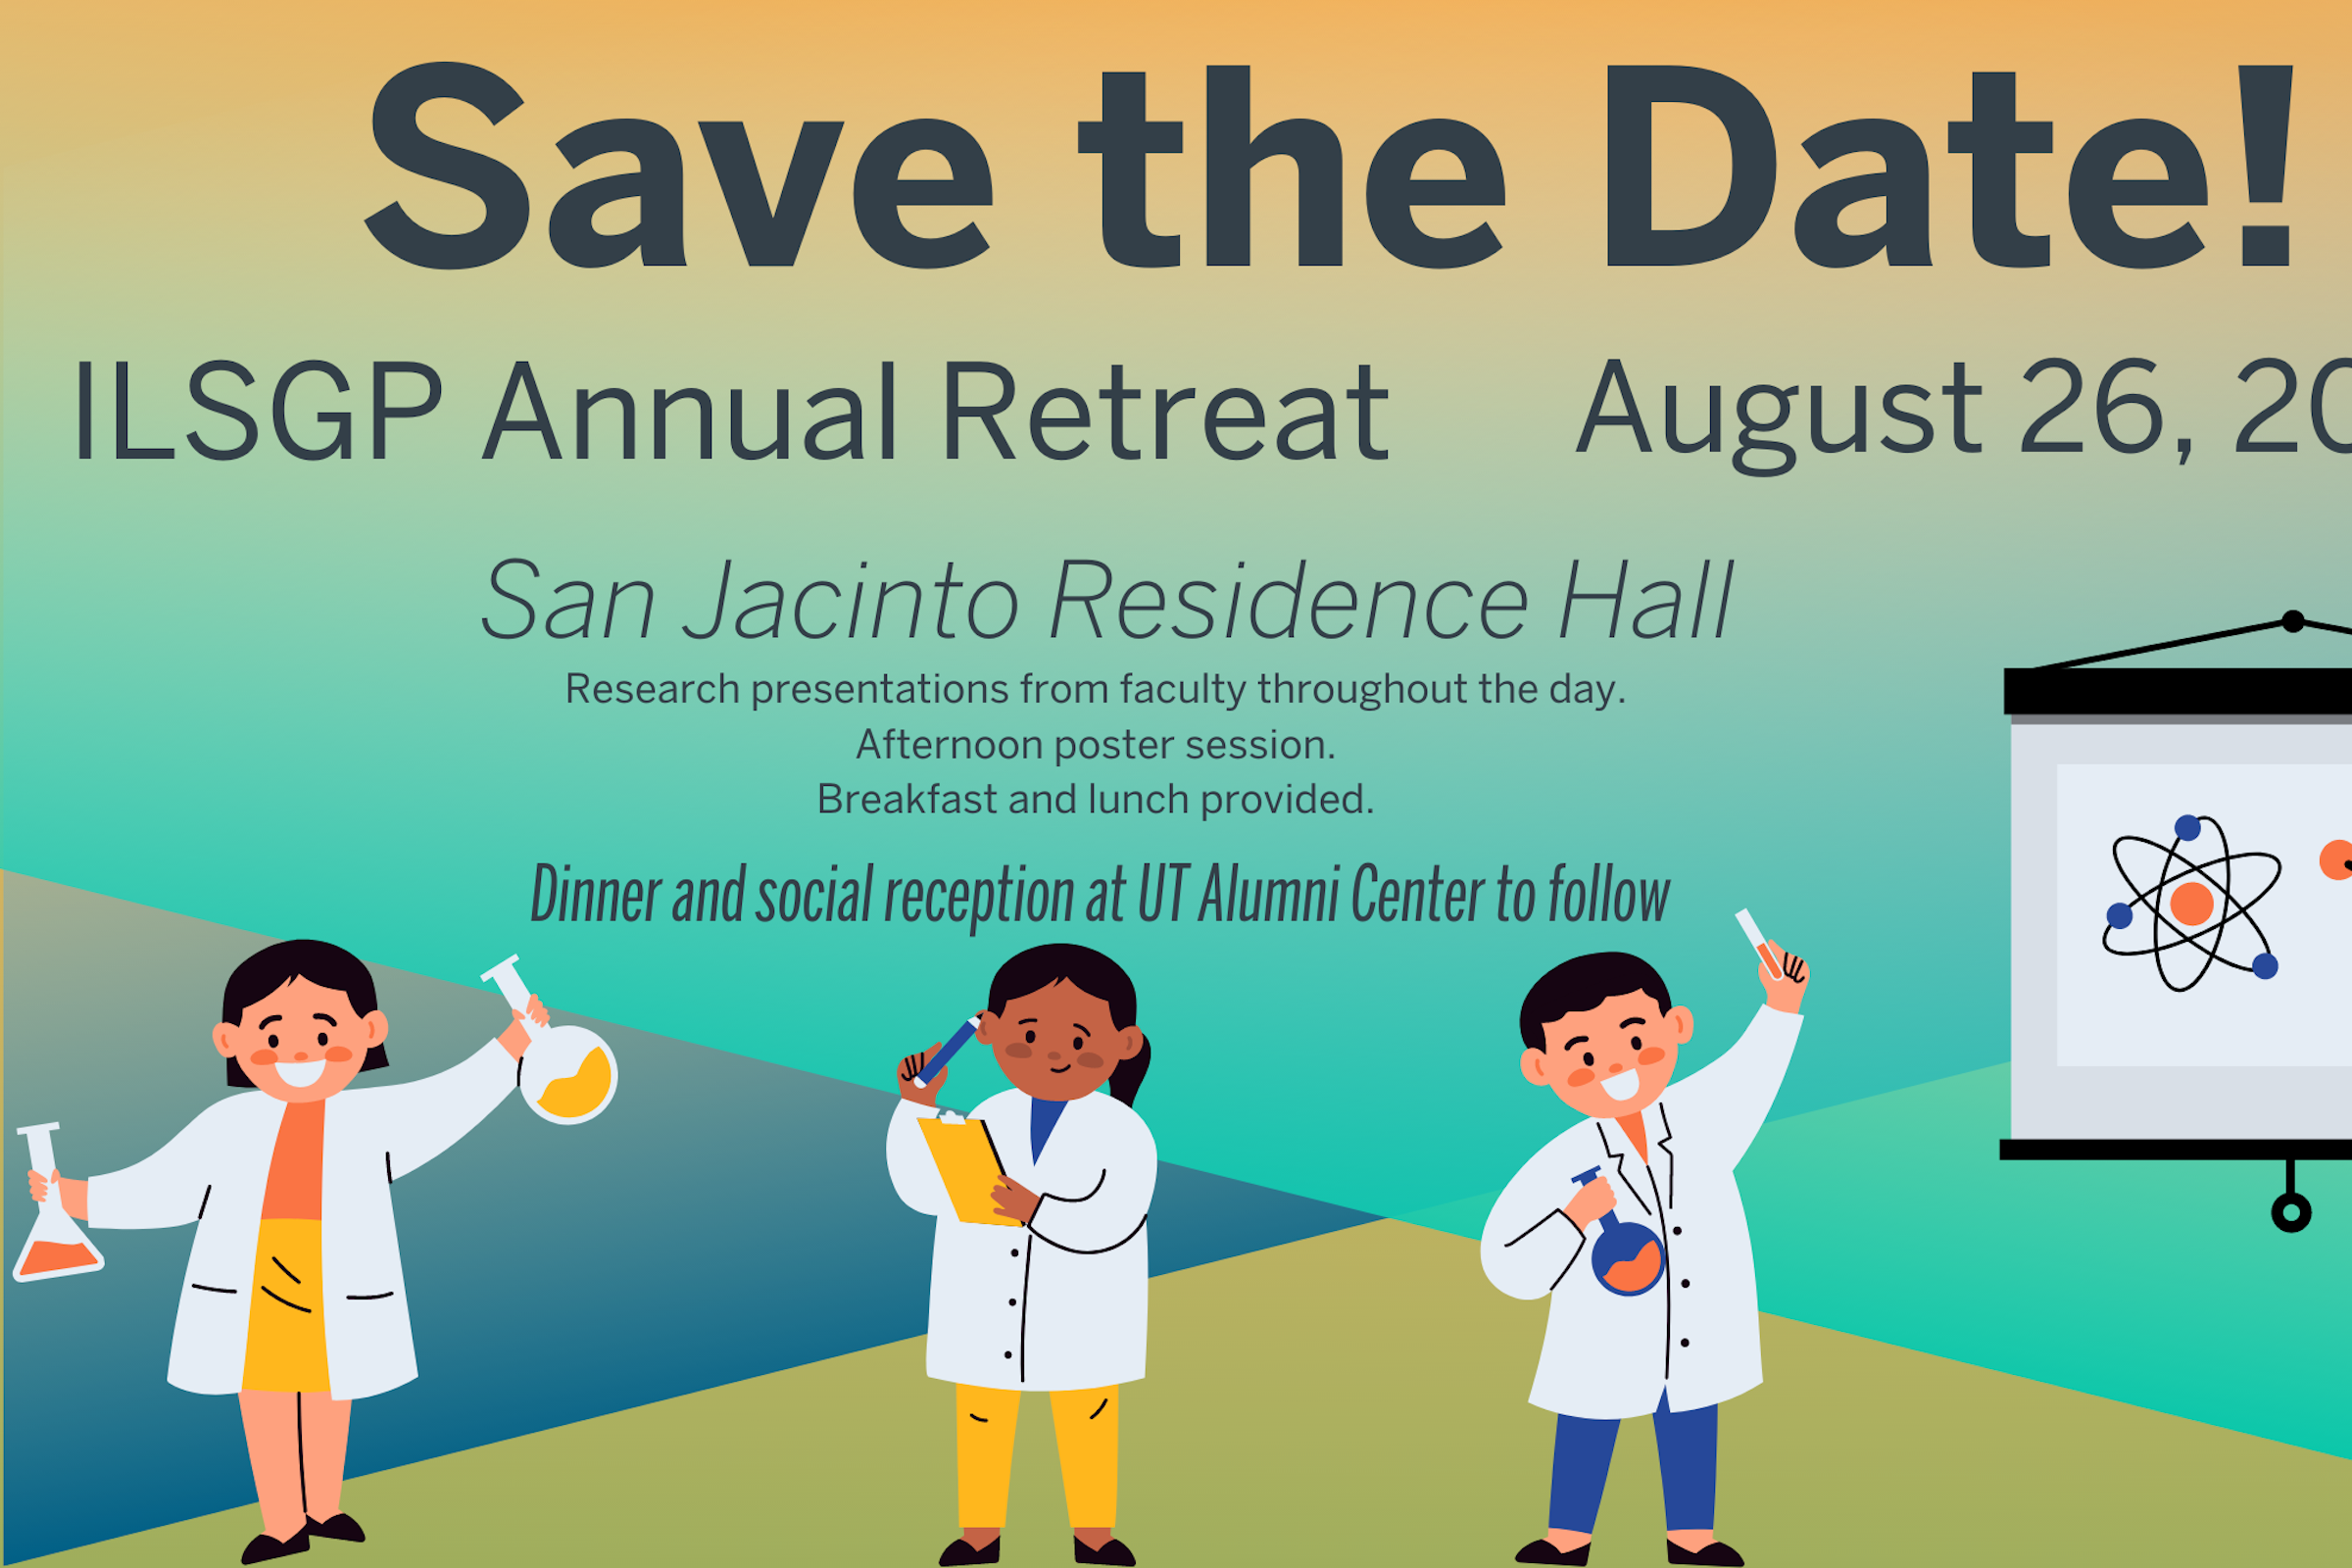 An announcement of the ILSGP Annual Retreat, August 26th 2022 located at the San Jacinto Residence Hall. It states that there will be research talks and poster presentations with a dinner and social reception to follow at the UT Alumni Center. It shows four cartoon researchers doing or presenting research.  